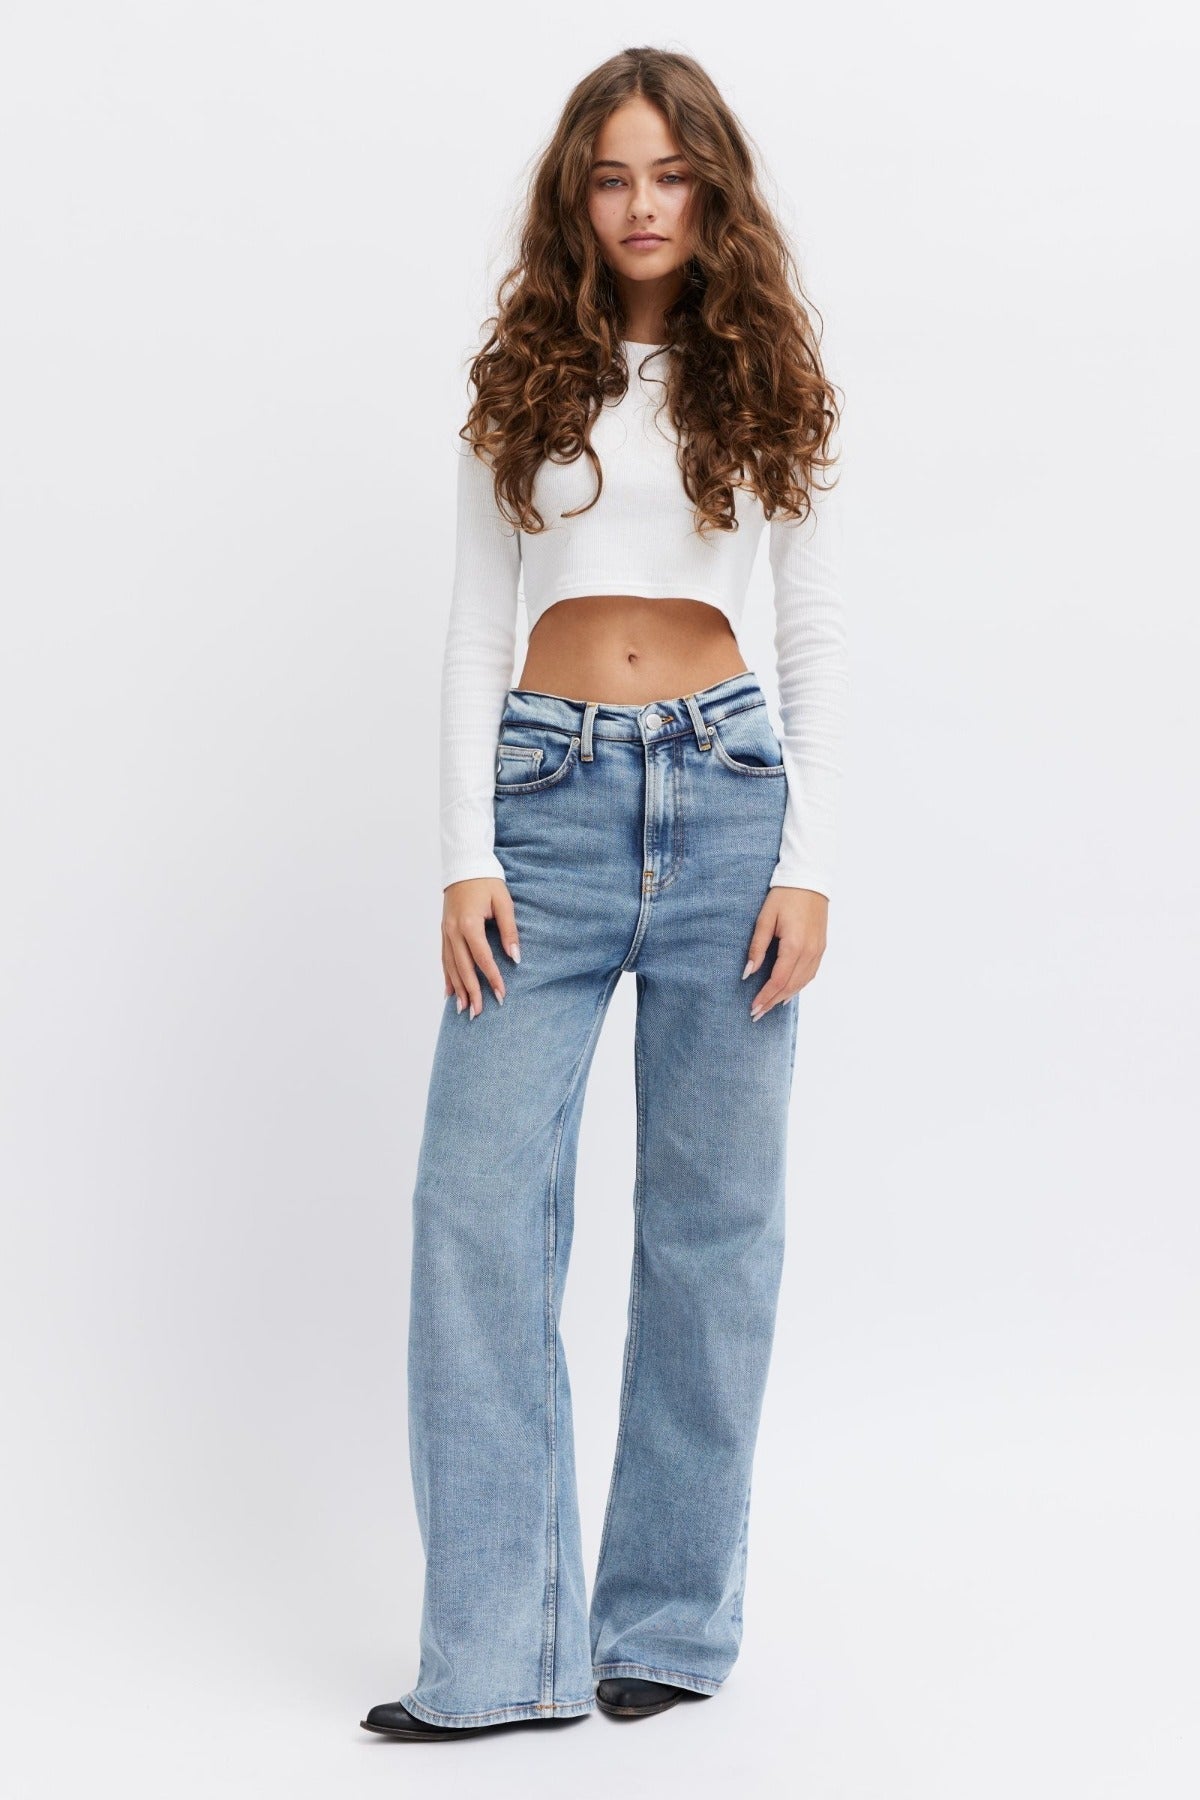 Lease Jeans - Ethical Fashion 